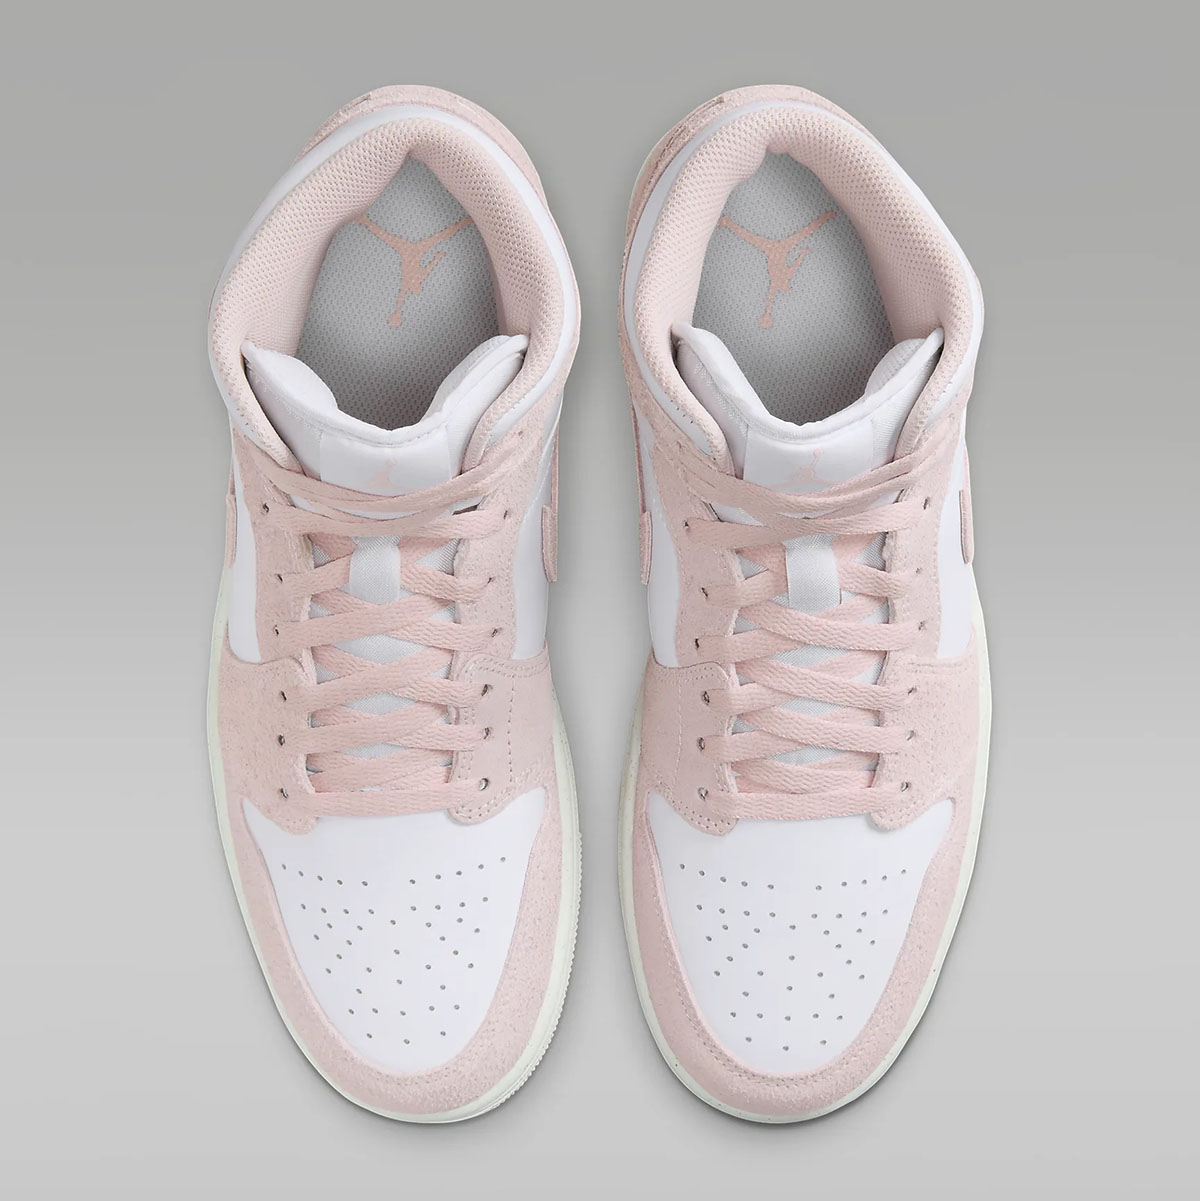 that hit Foot Locker and other Jordan Brand retailers tomorrow SE Legend Pink Suede 4